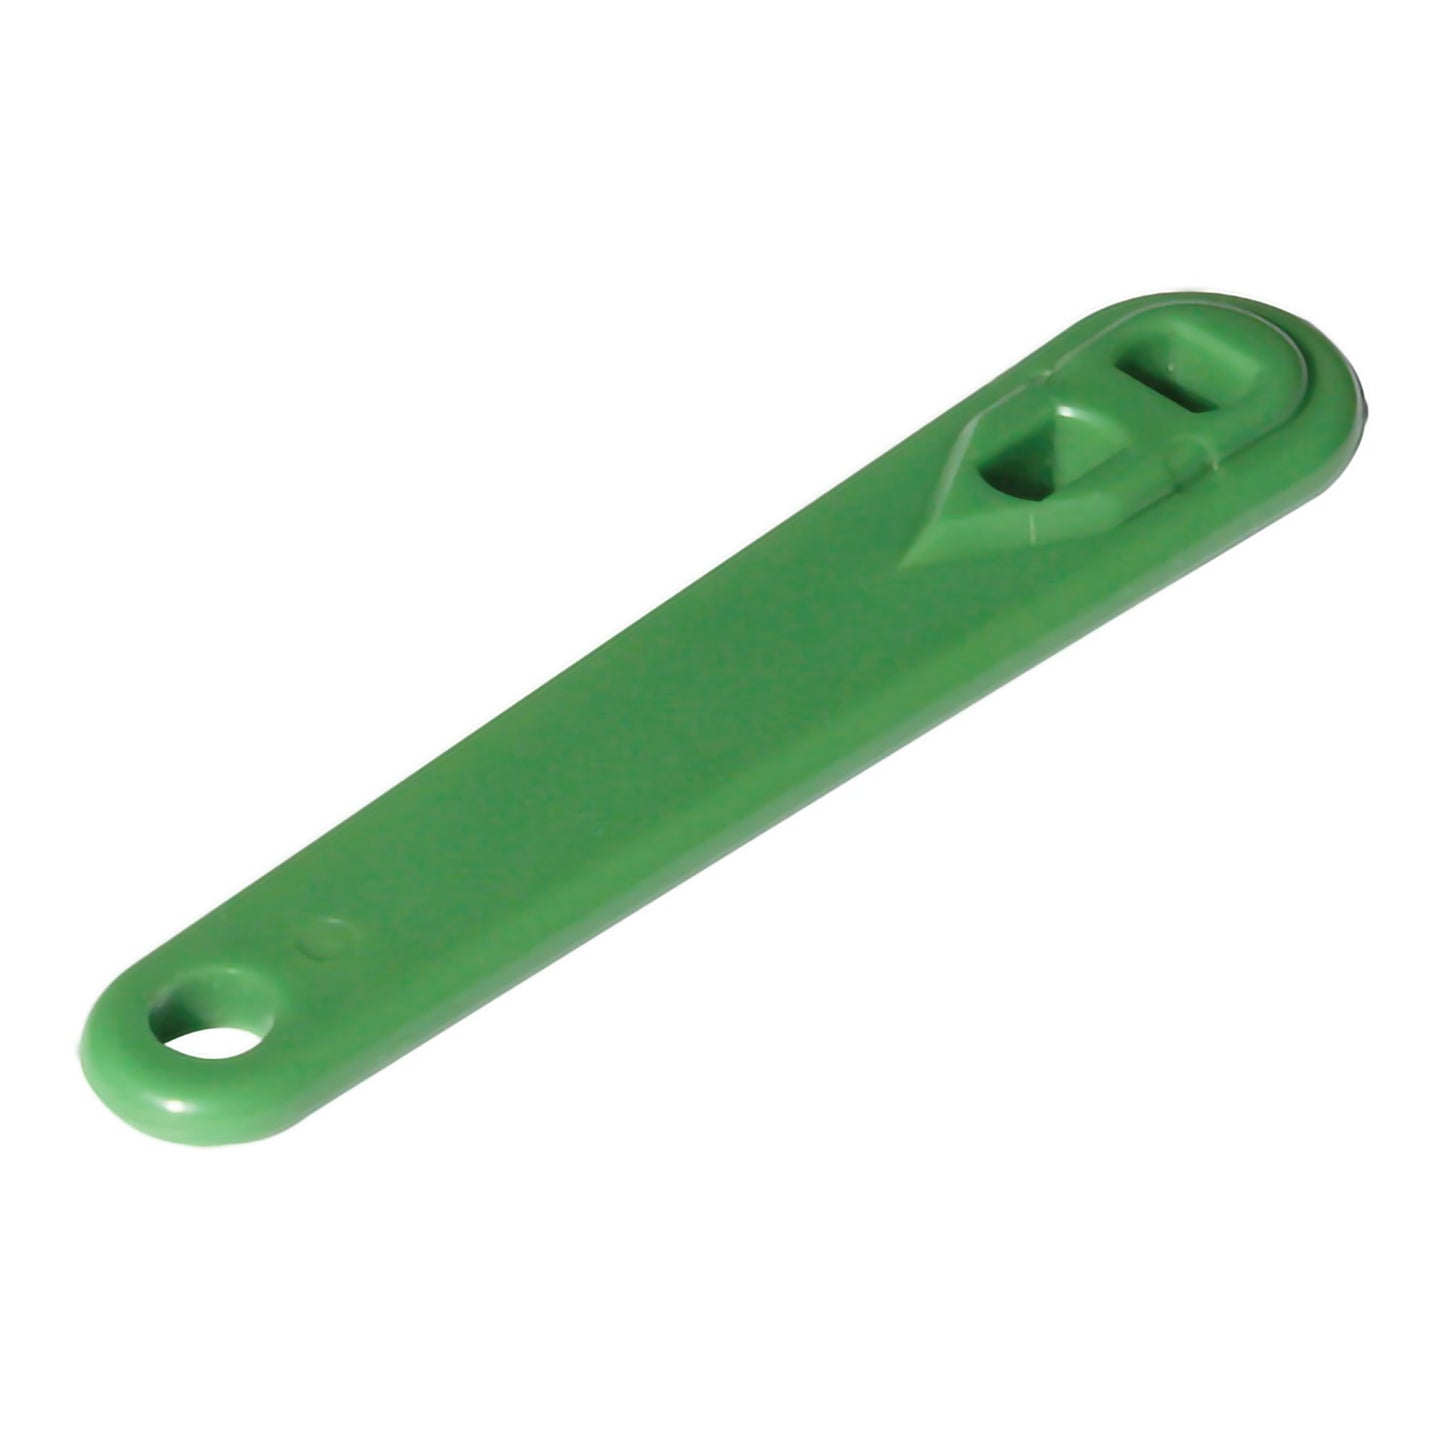 Sunset Healthcare Cylinder Wrench, 10 ct